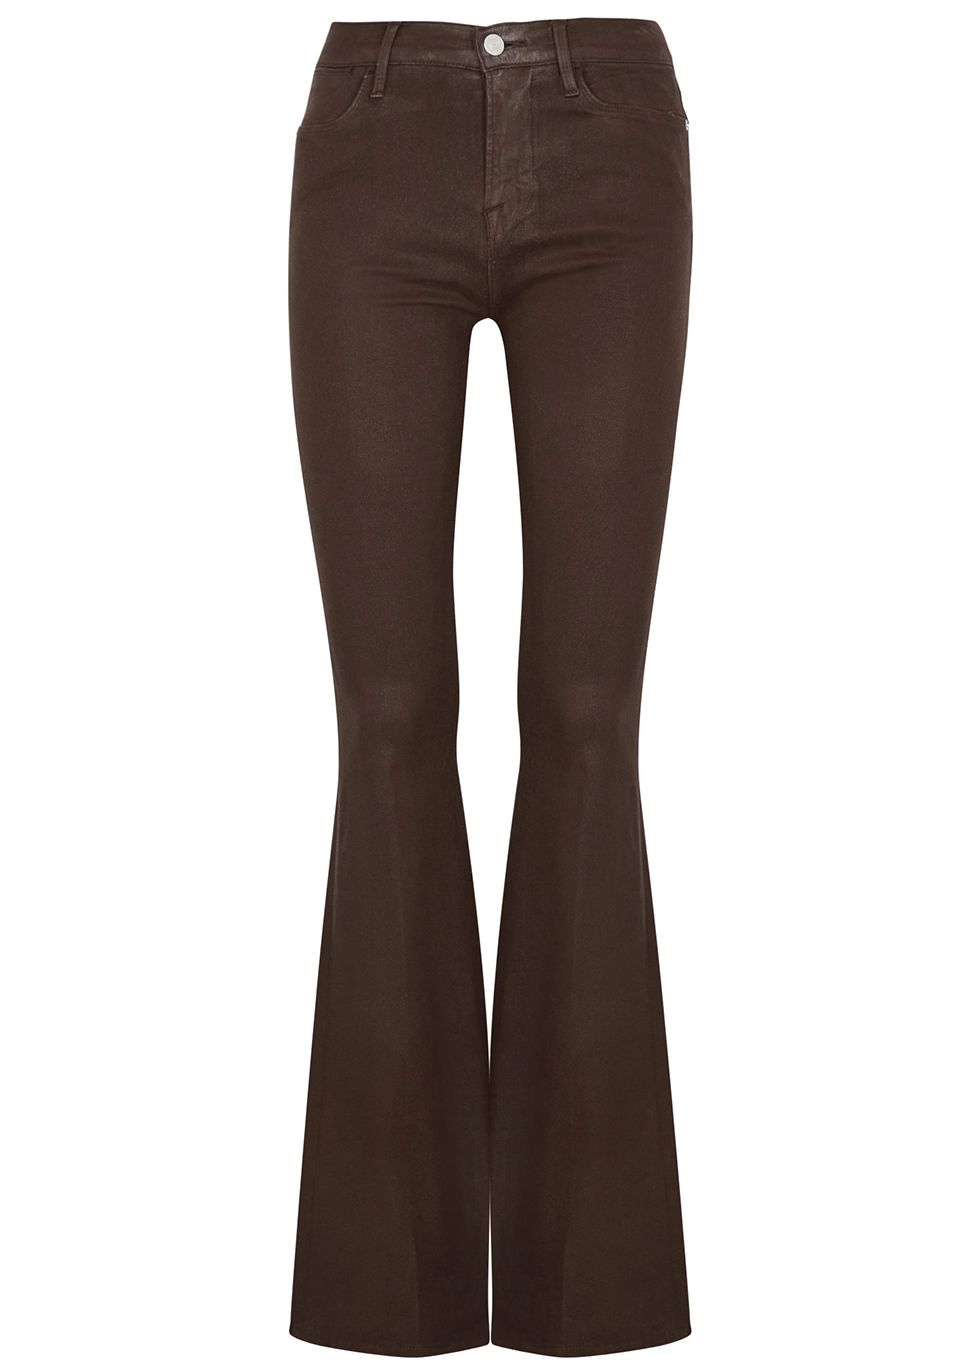 Le High Flare brown coated jeans | Harvey Nichols US